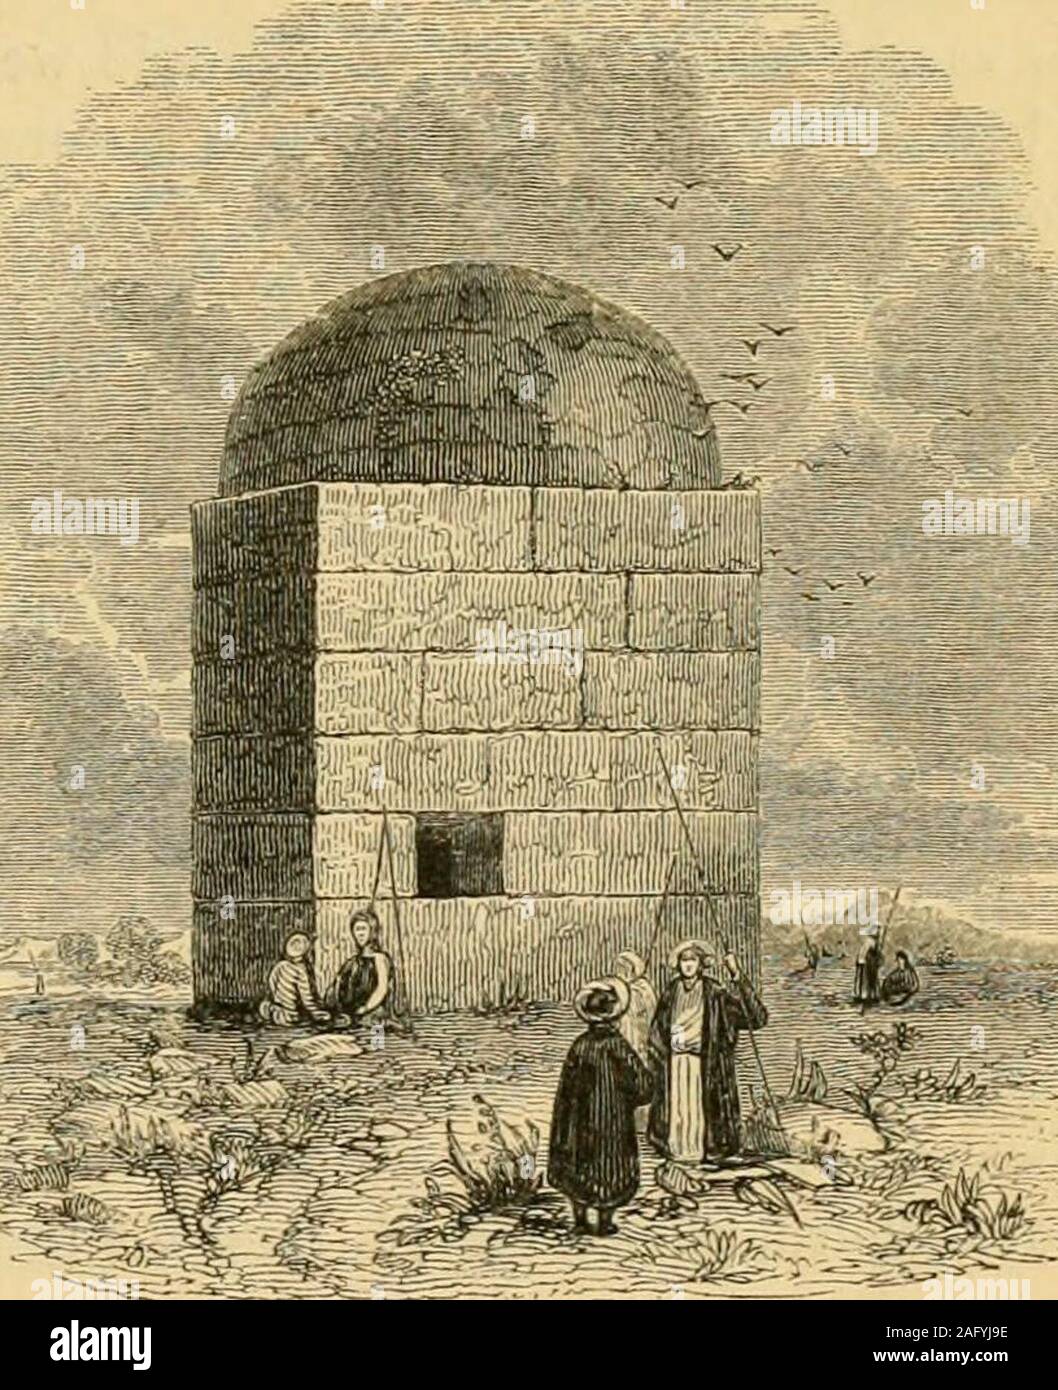 The pictorial history of Palestine and the Holy land including a complete  history of the Jews. [Tower in the Desert.] [RicheVs Sepulchre.] While  Jacob tarried at this place, his beloved Rachel